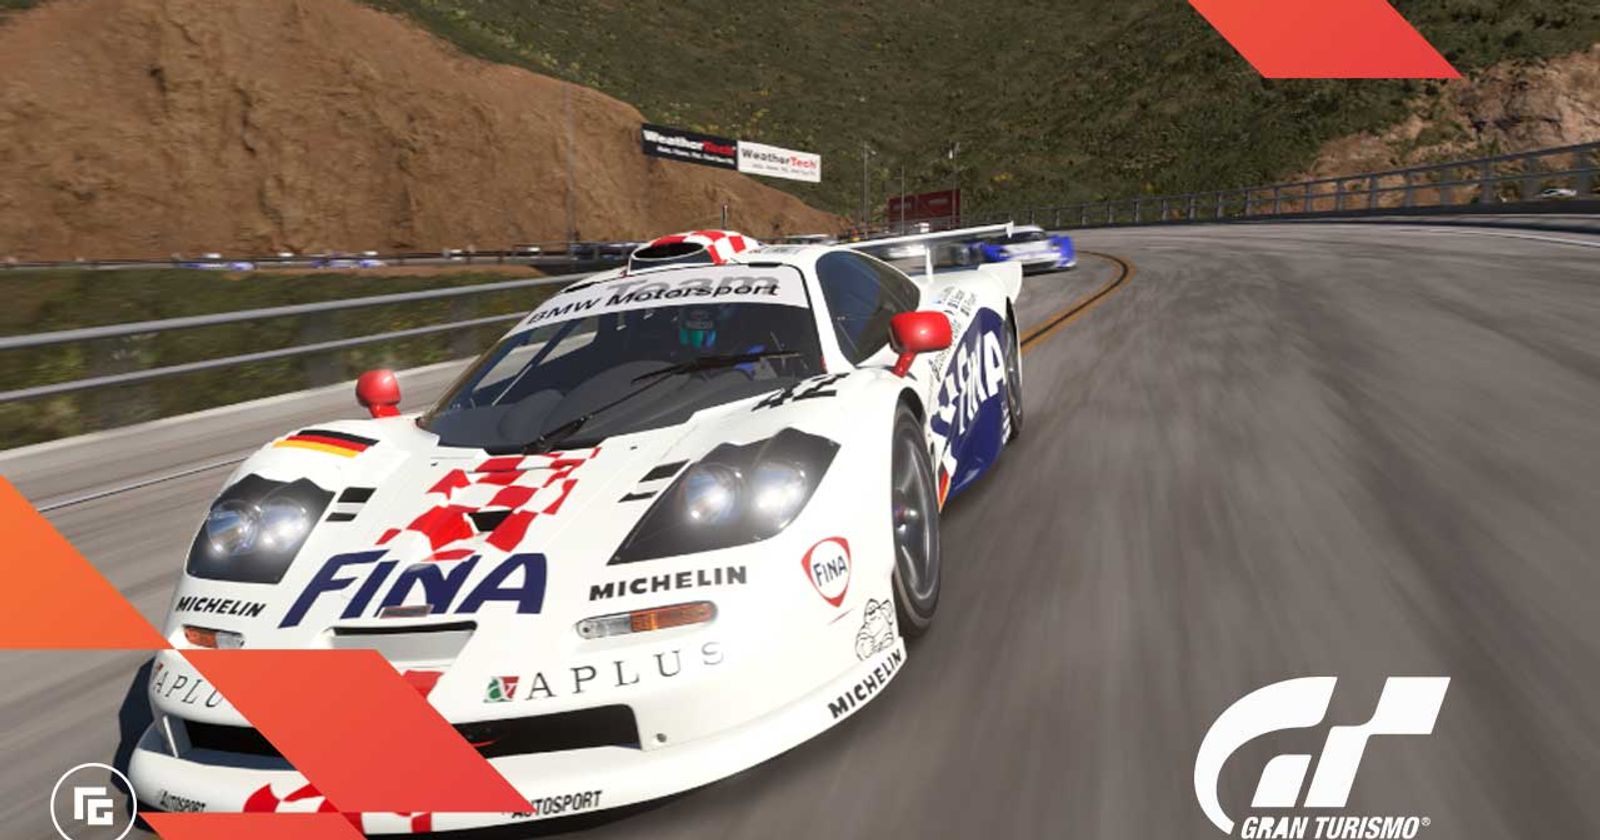 Gran Turismo 7 Update 1.34 Races Out for New Cars This May 25